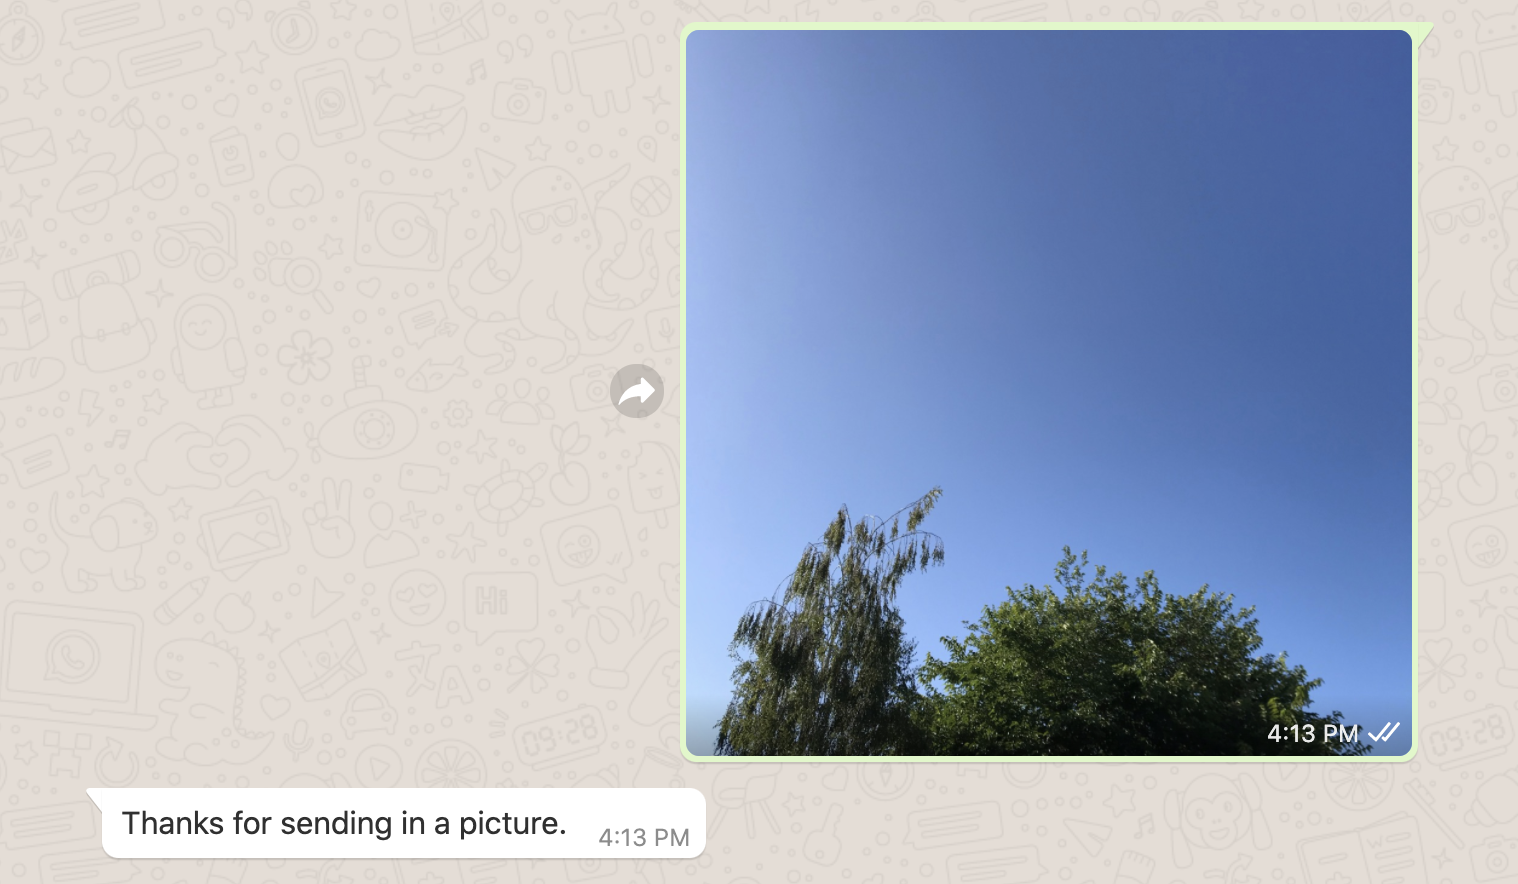 screenshot of whatsapp conversation of a picture of a sky and a thank you message